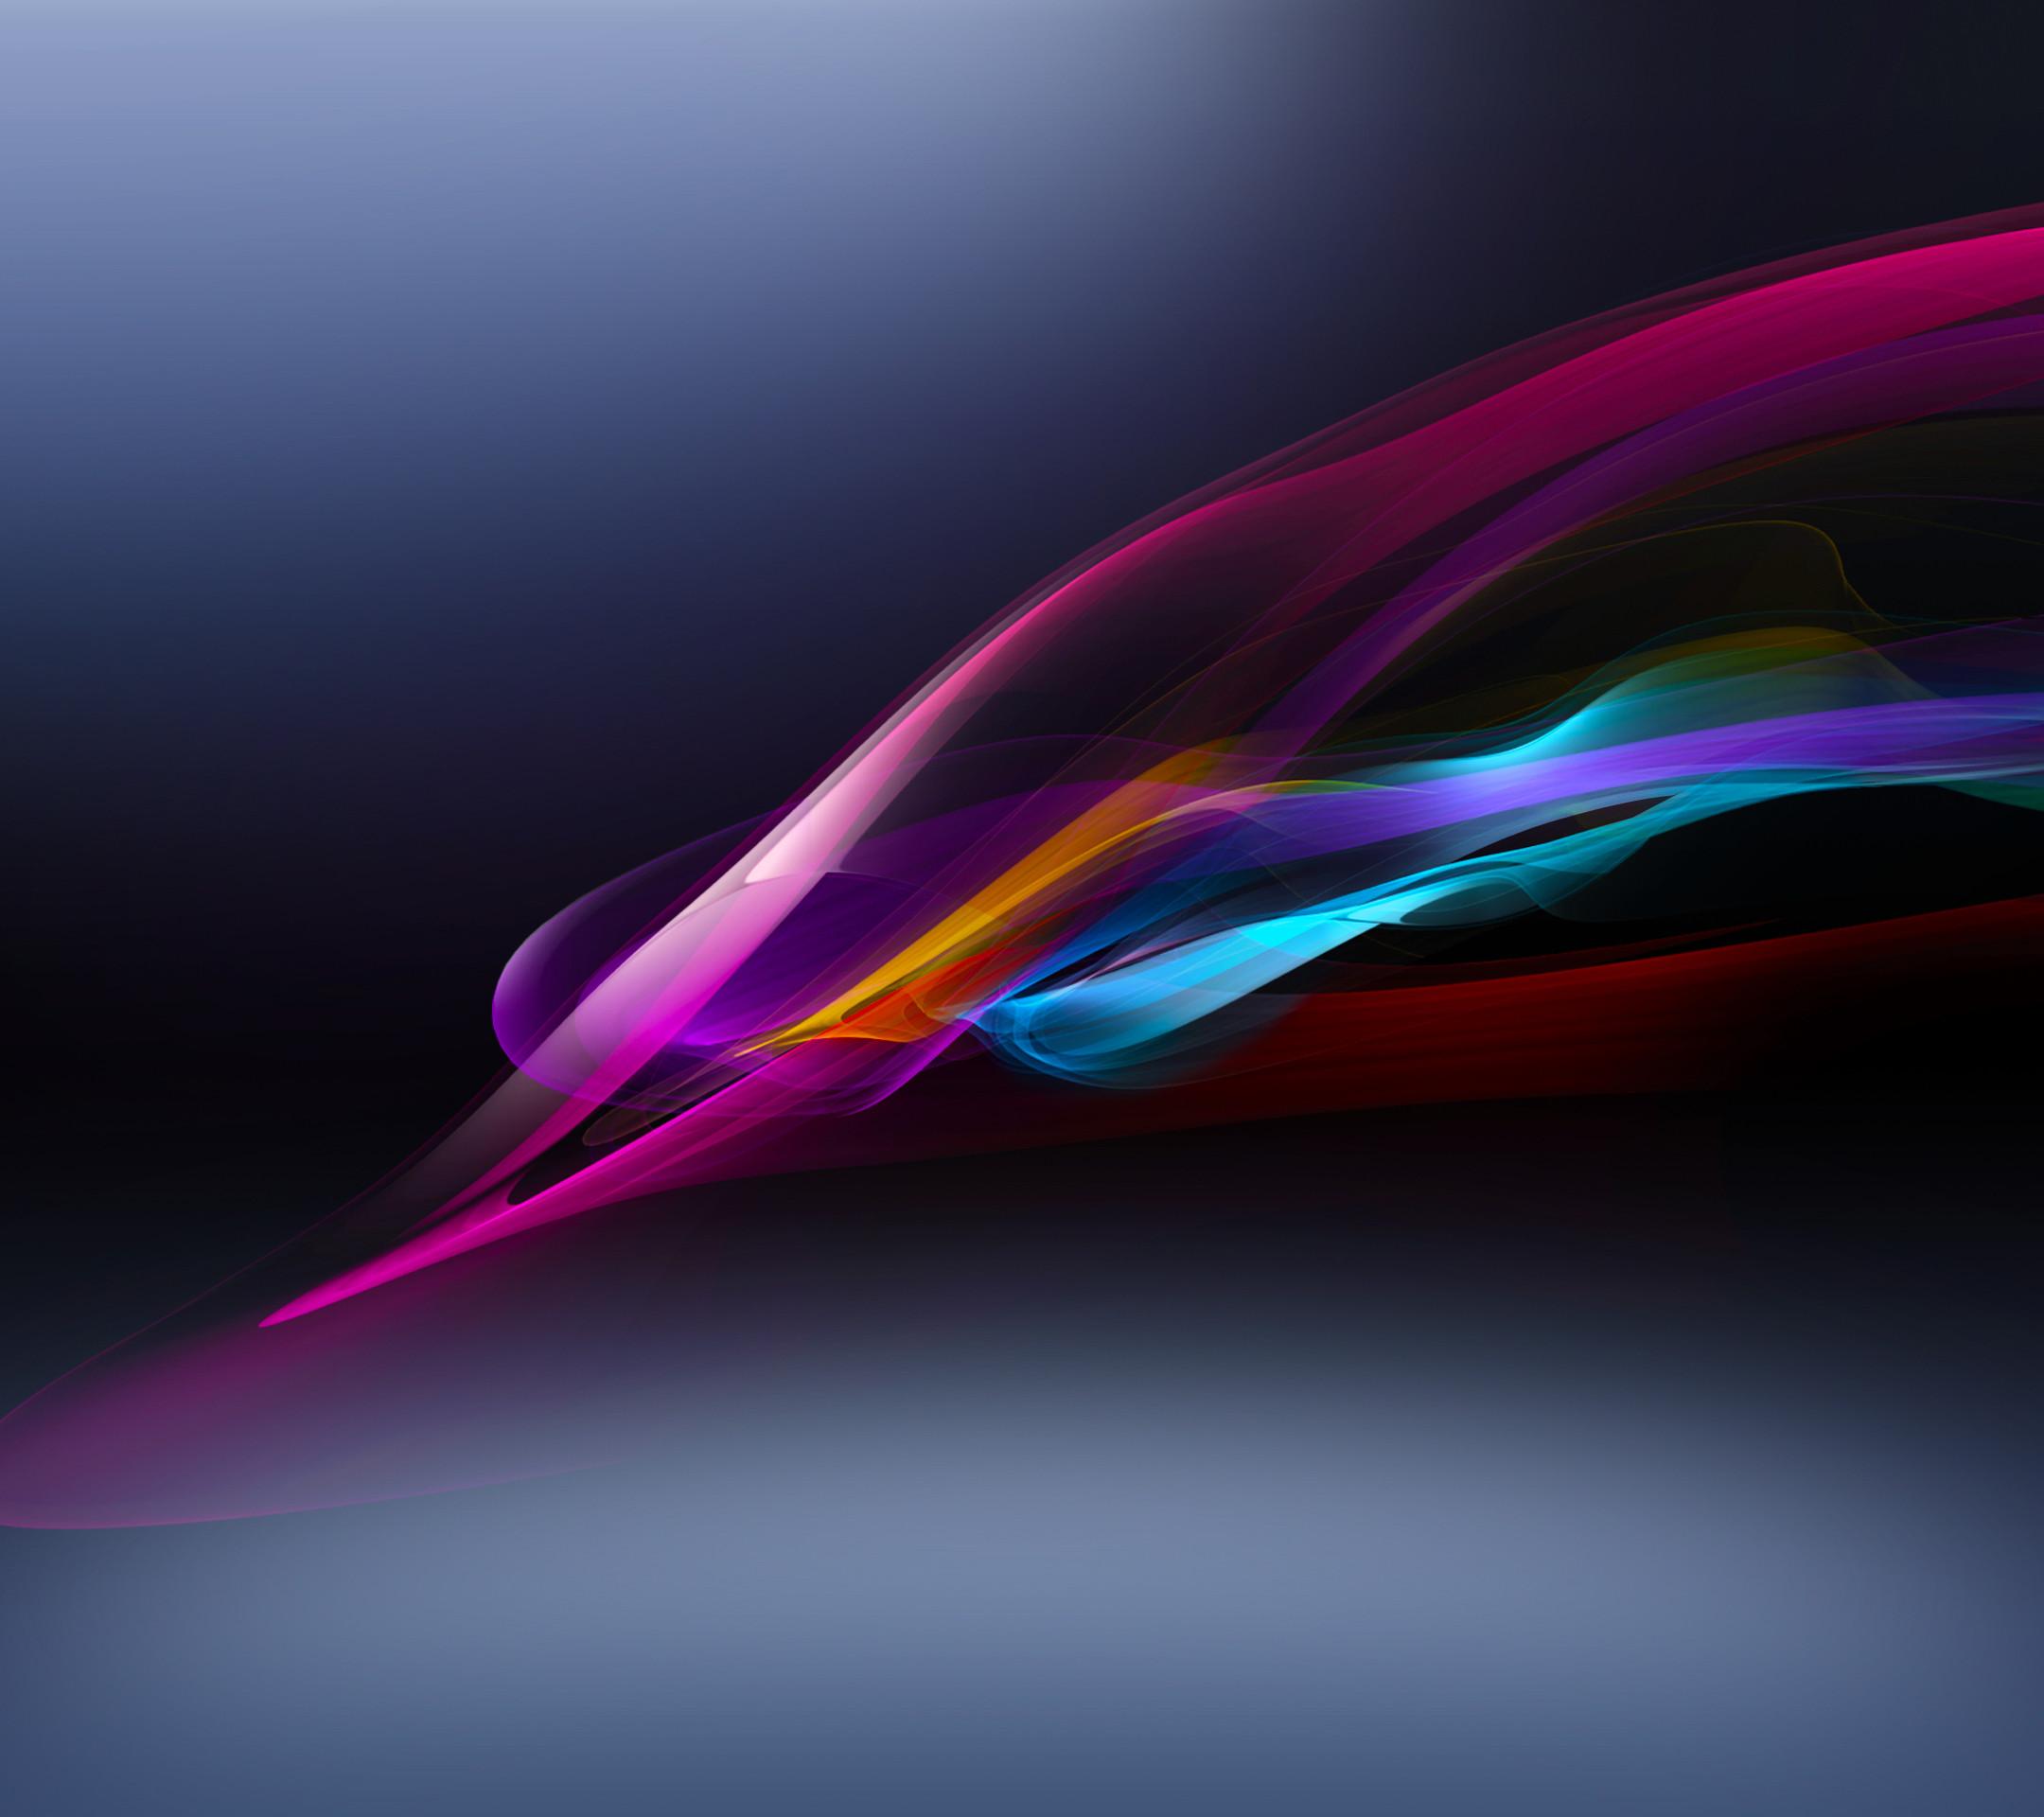 Sony Xperia Z1 wallpaper now available to download